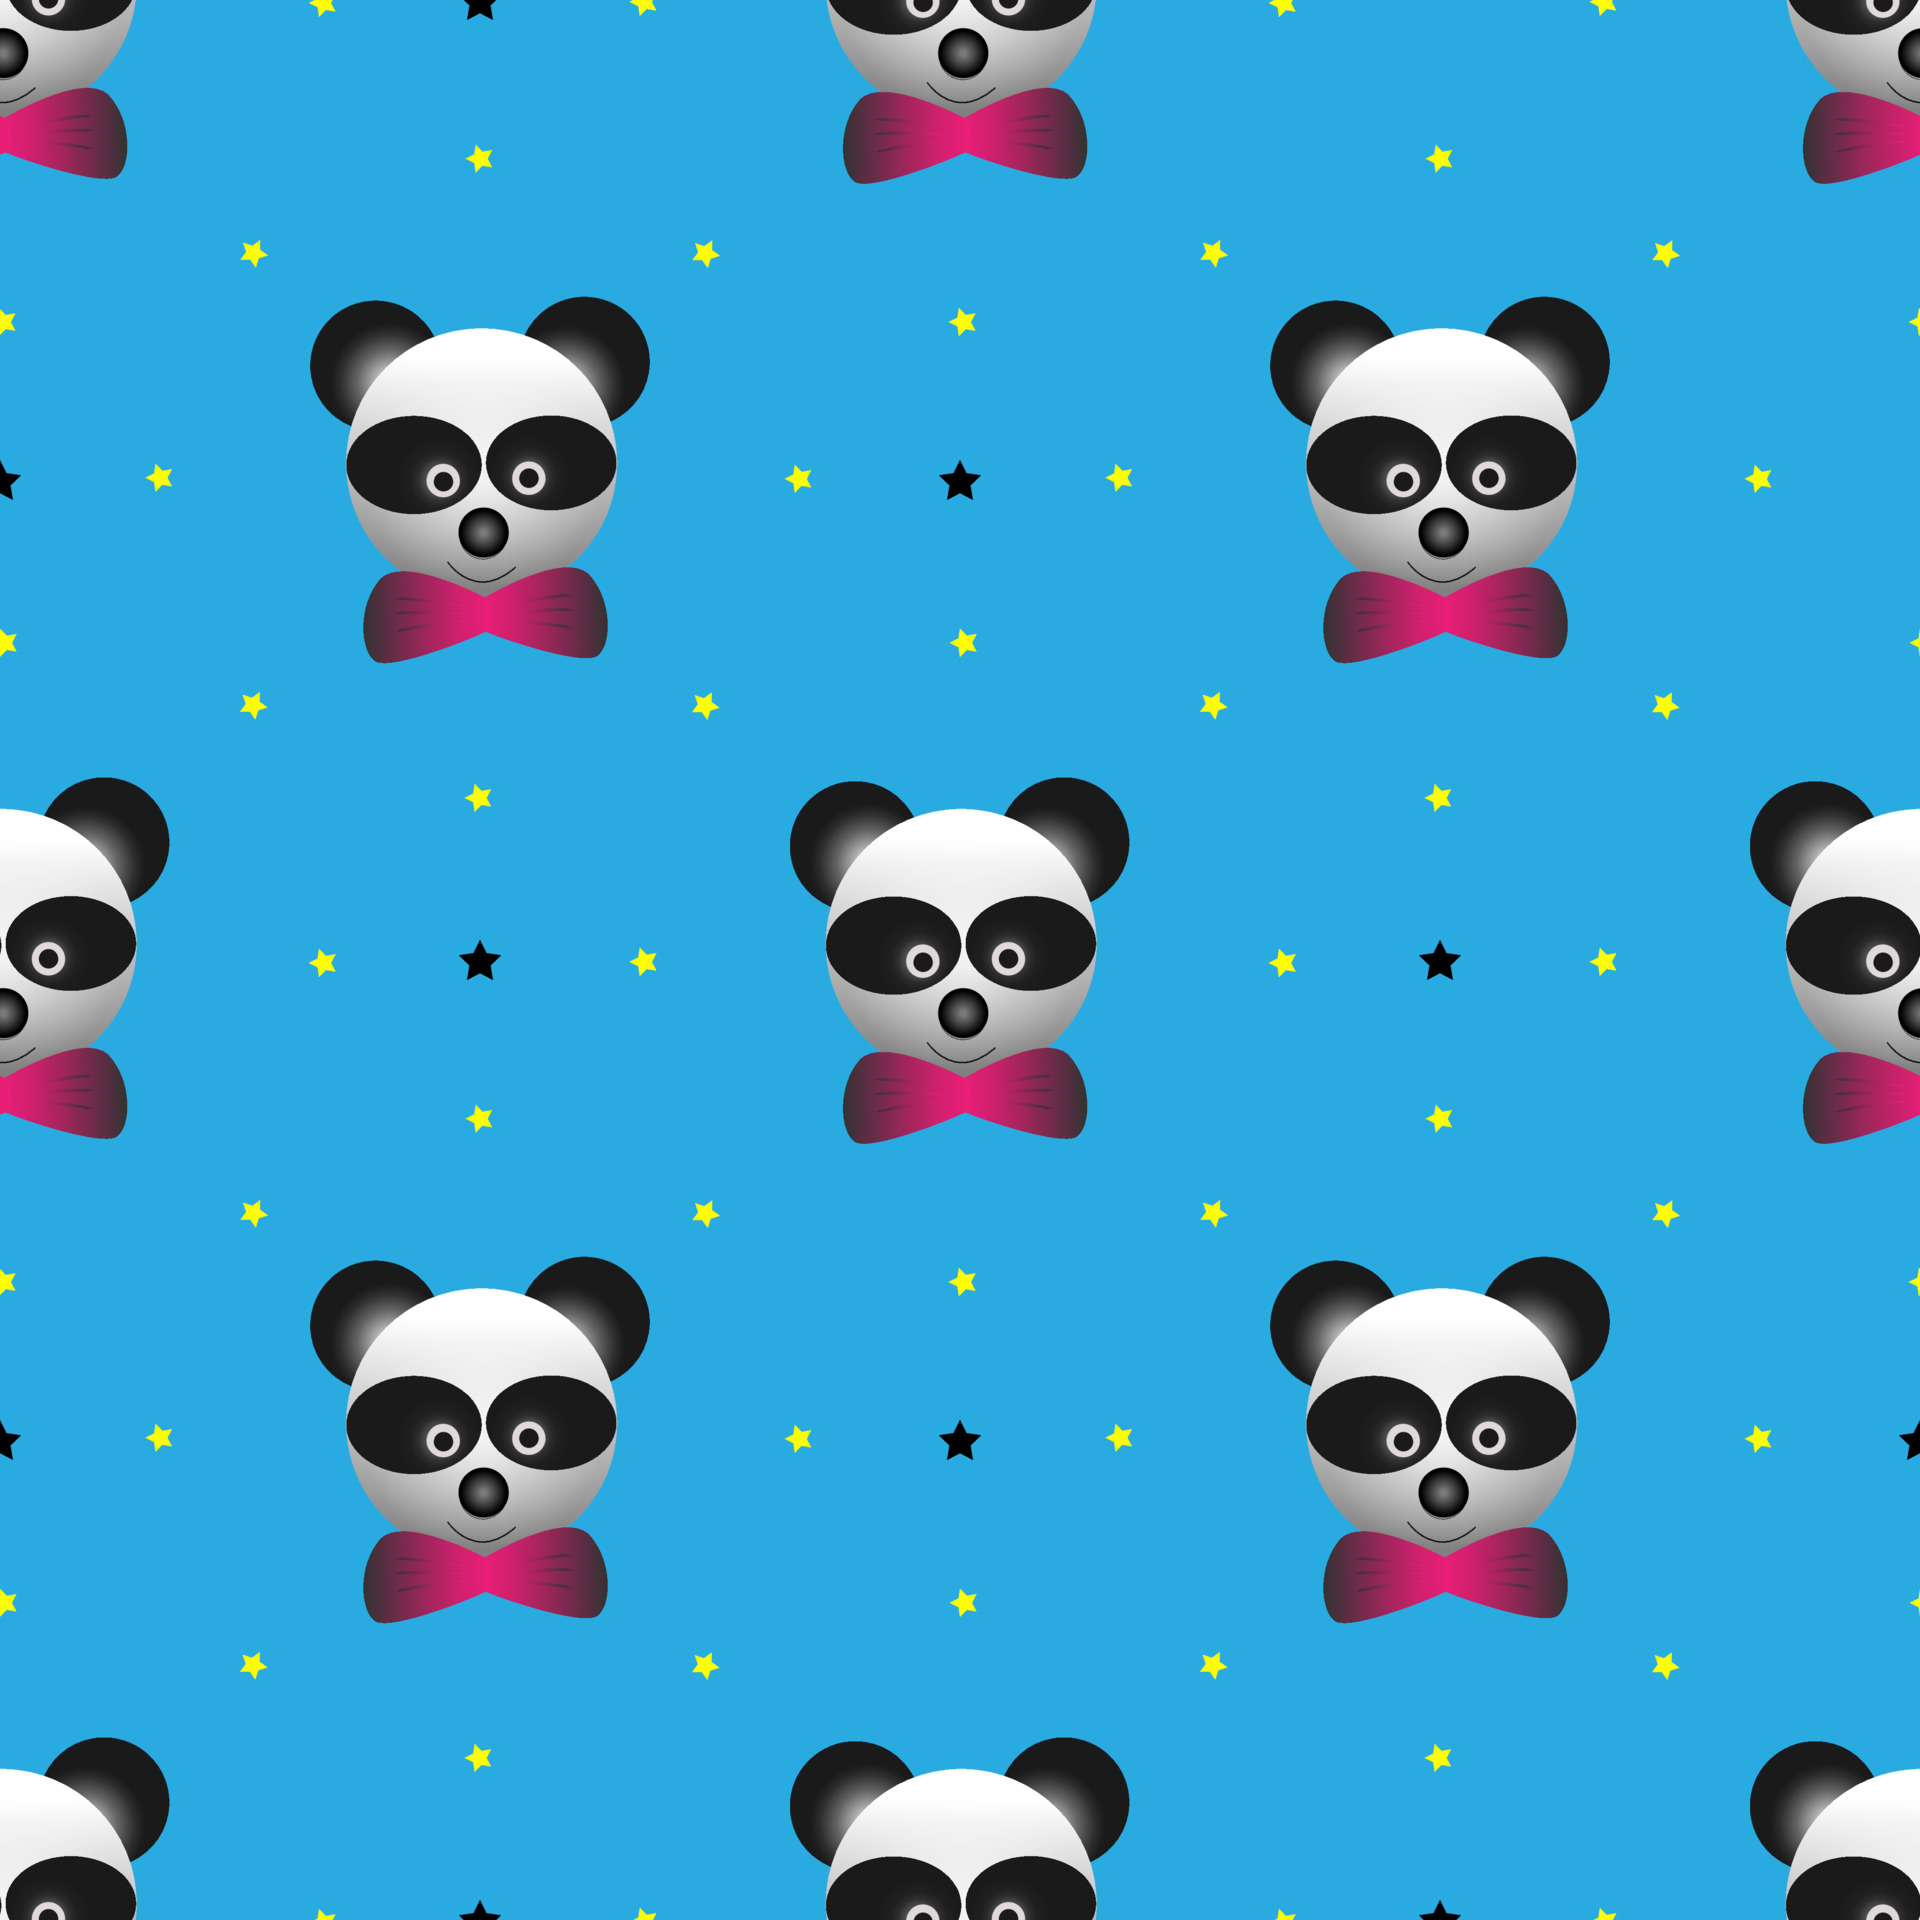 1920x1920 vector illustration of panda bear animal design wearing tie and small star spots. blue background. Seamless pattern designs for wallpapers, backdrops, covers, paper cut, stickers and prints on fabric 3791381 Vector Art